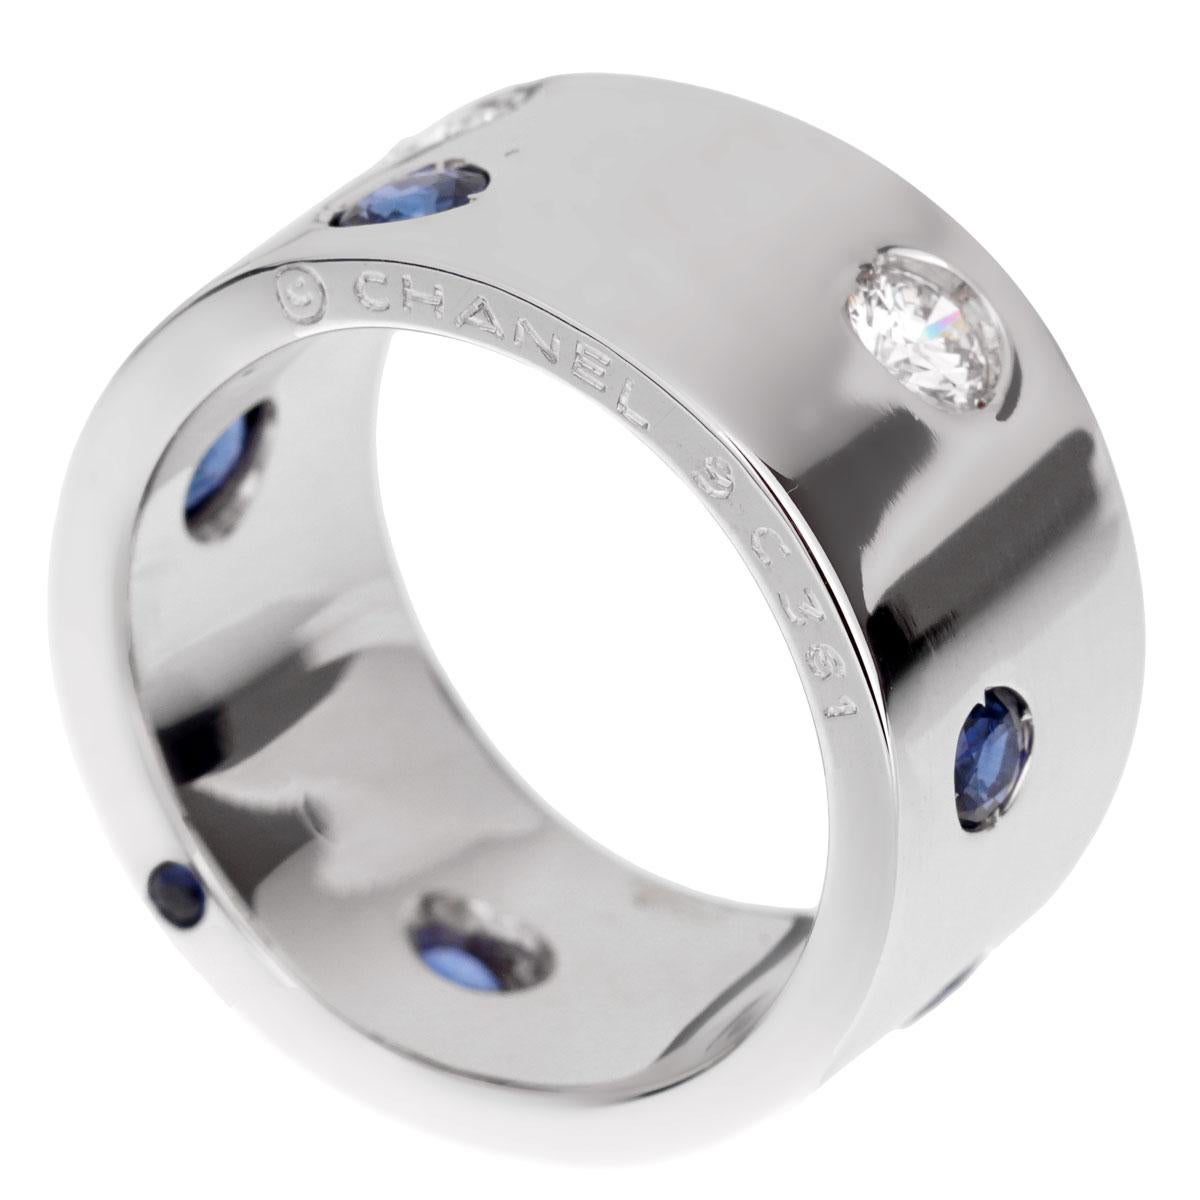 A fabulous Chanel band style rind showcasing 2 round brilliant cut diamonds and 6 sapphires set in 18k white gold. The ring measures a size 6 1/4

Width: .39